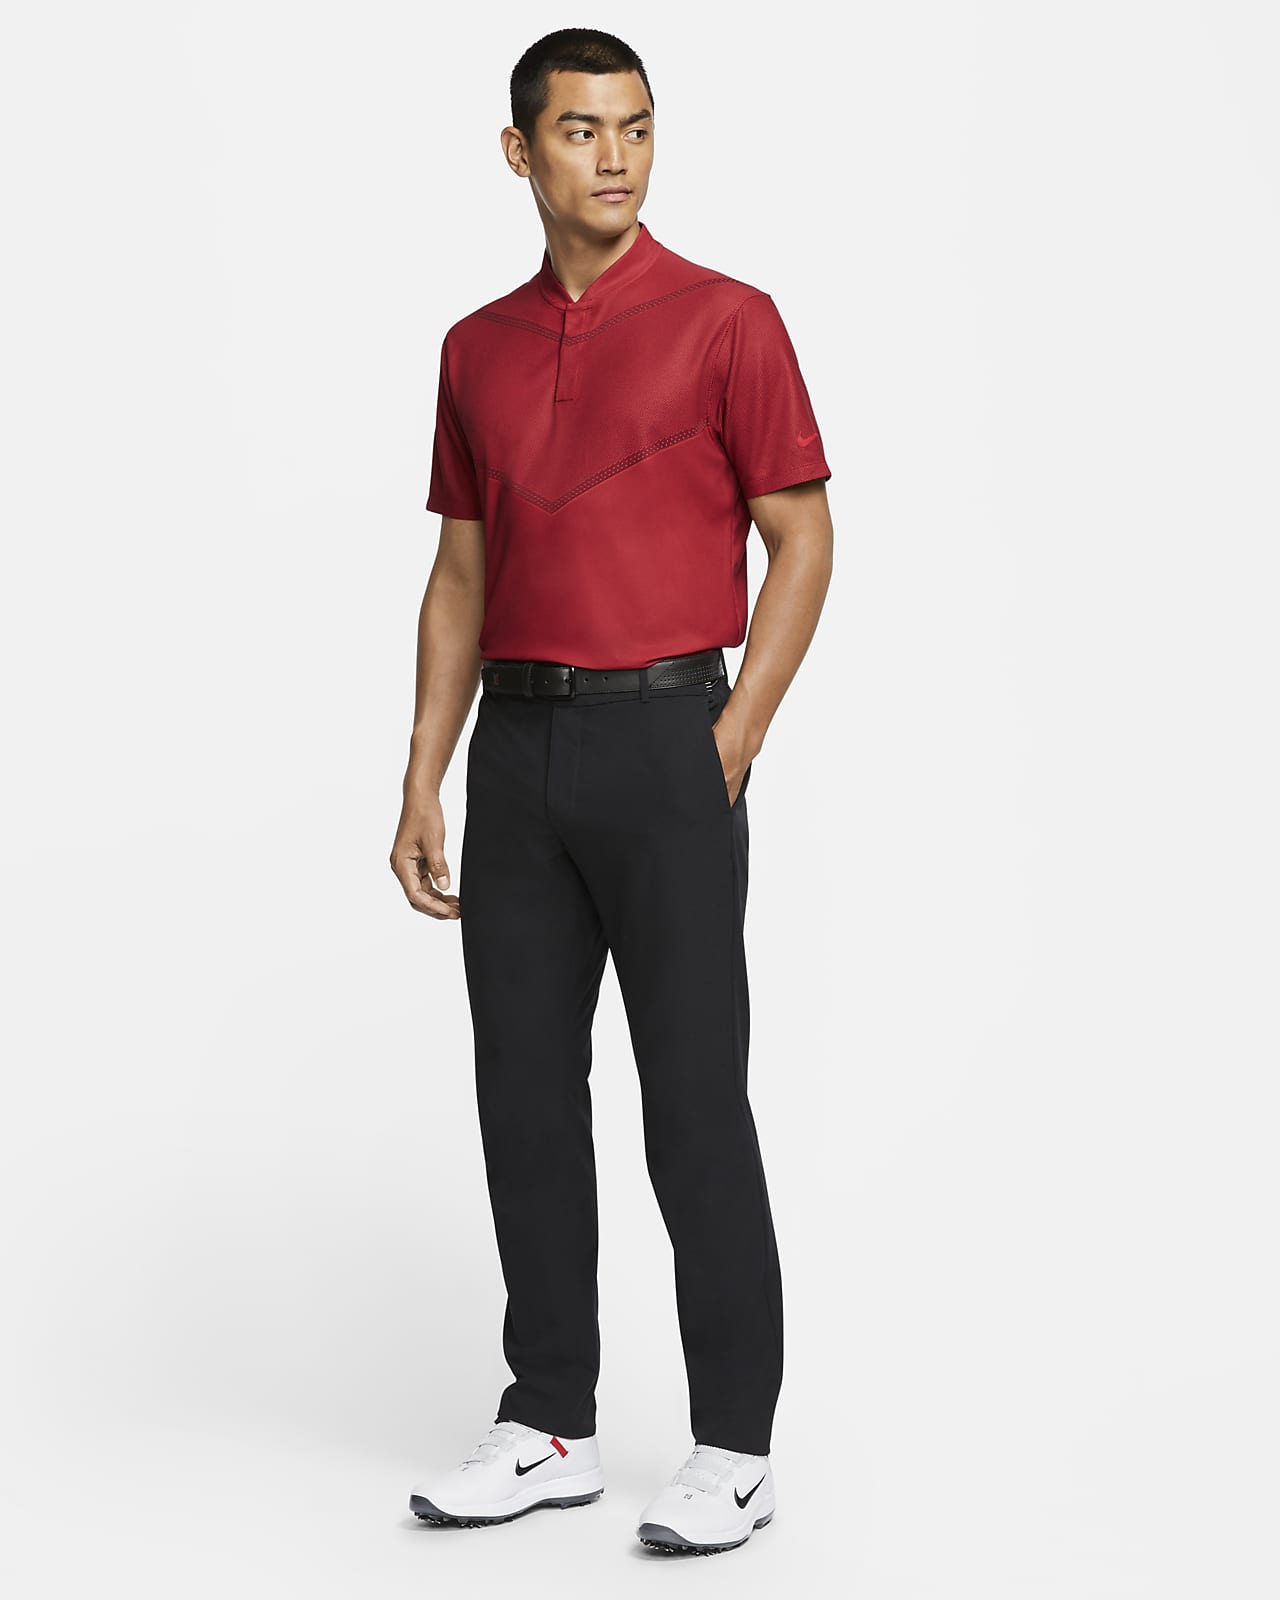 tiger woods collection dri fit